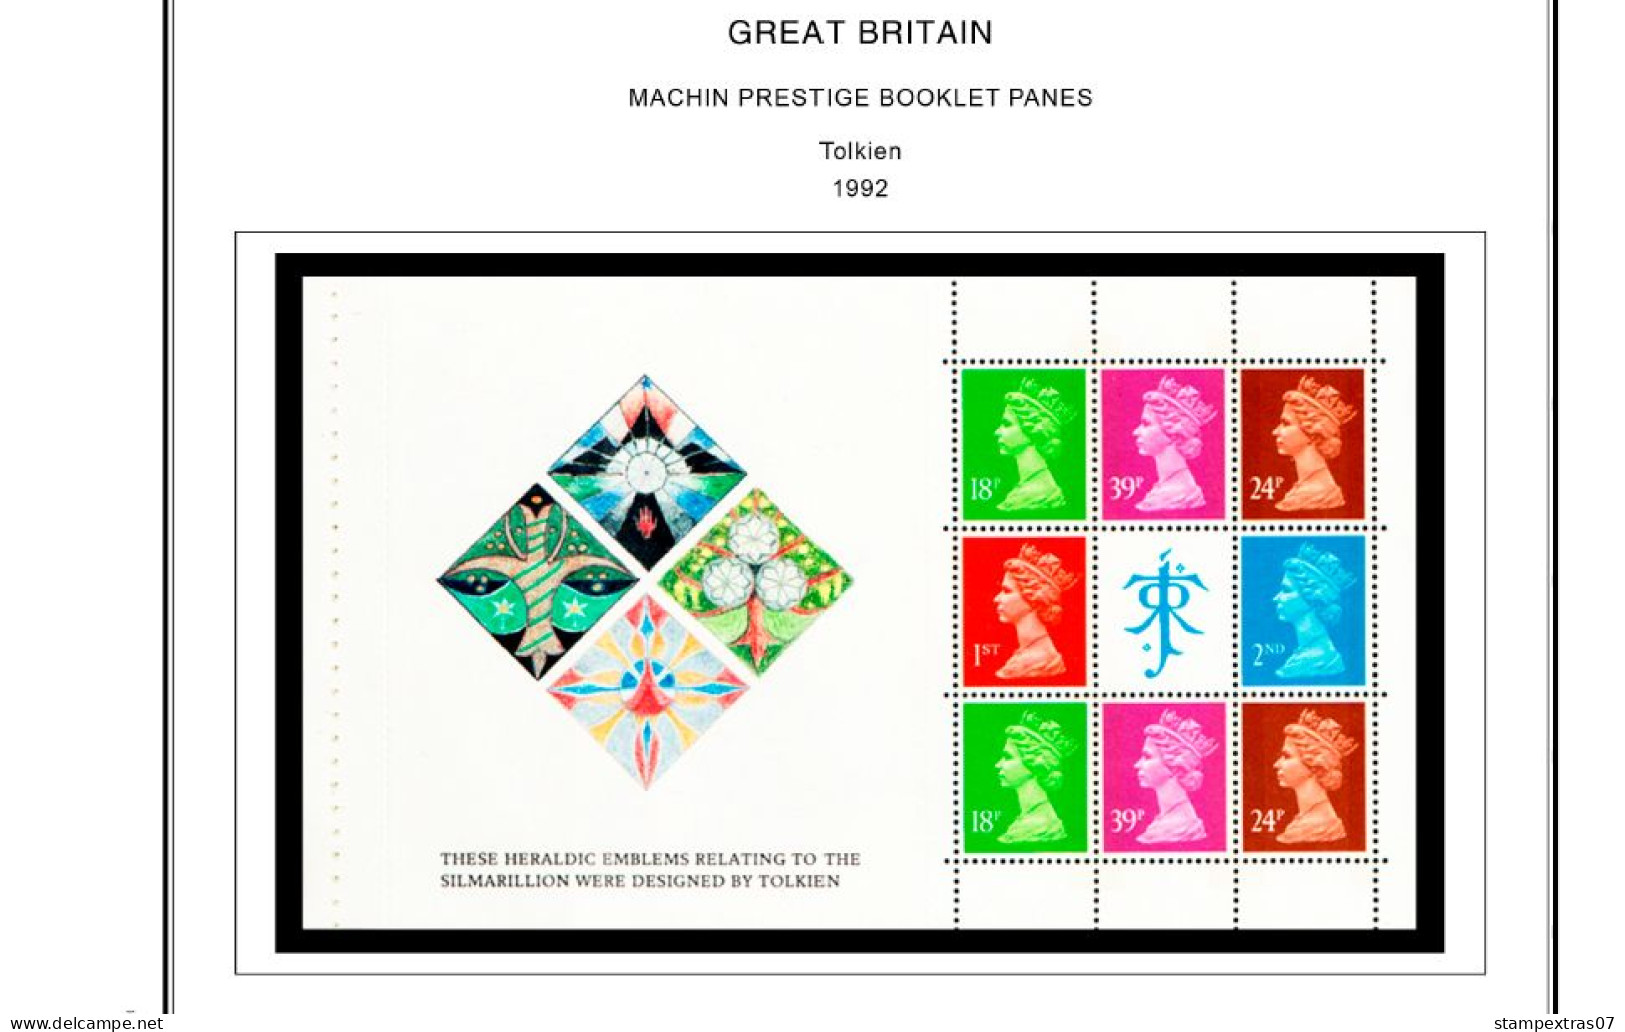 COLOR PRINTED GREAT BRITAIN MACHIN PRESTIGE PANES 1969-2023 STAMP ALBUM PAGES (121 illustrated pages) >> FEUILLES ALBUM